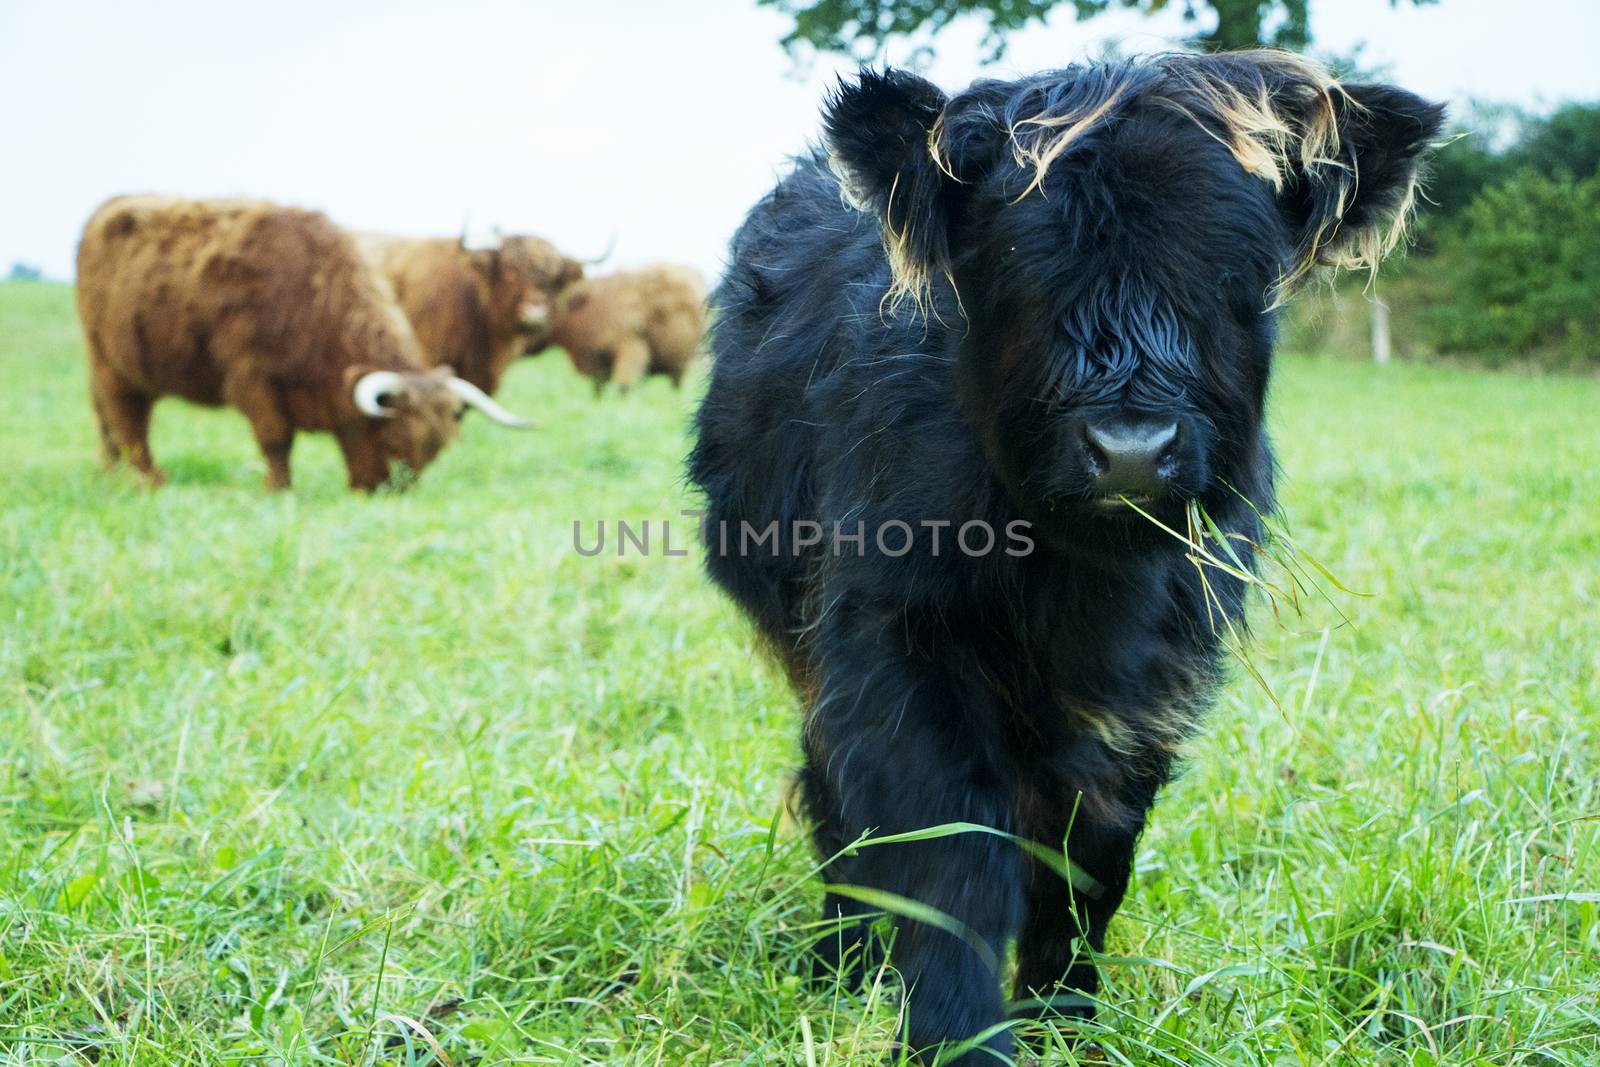 Highland Cow Calf by Mads_Hjorth_Jakobsen